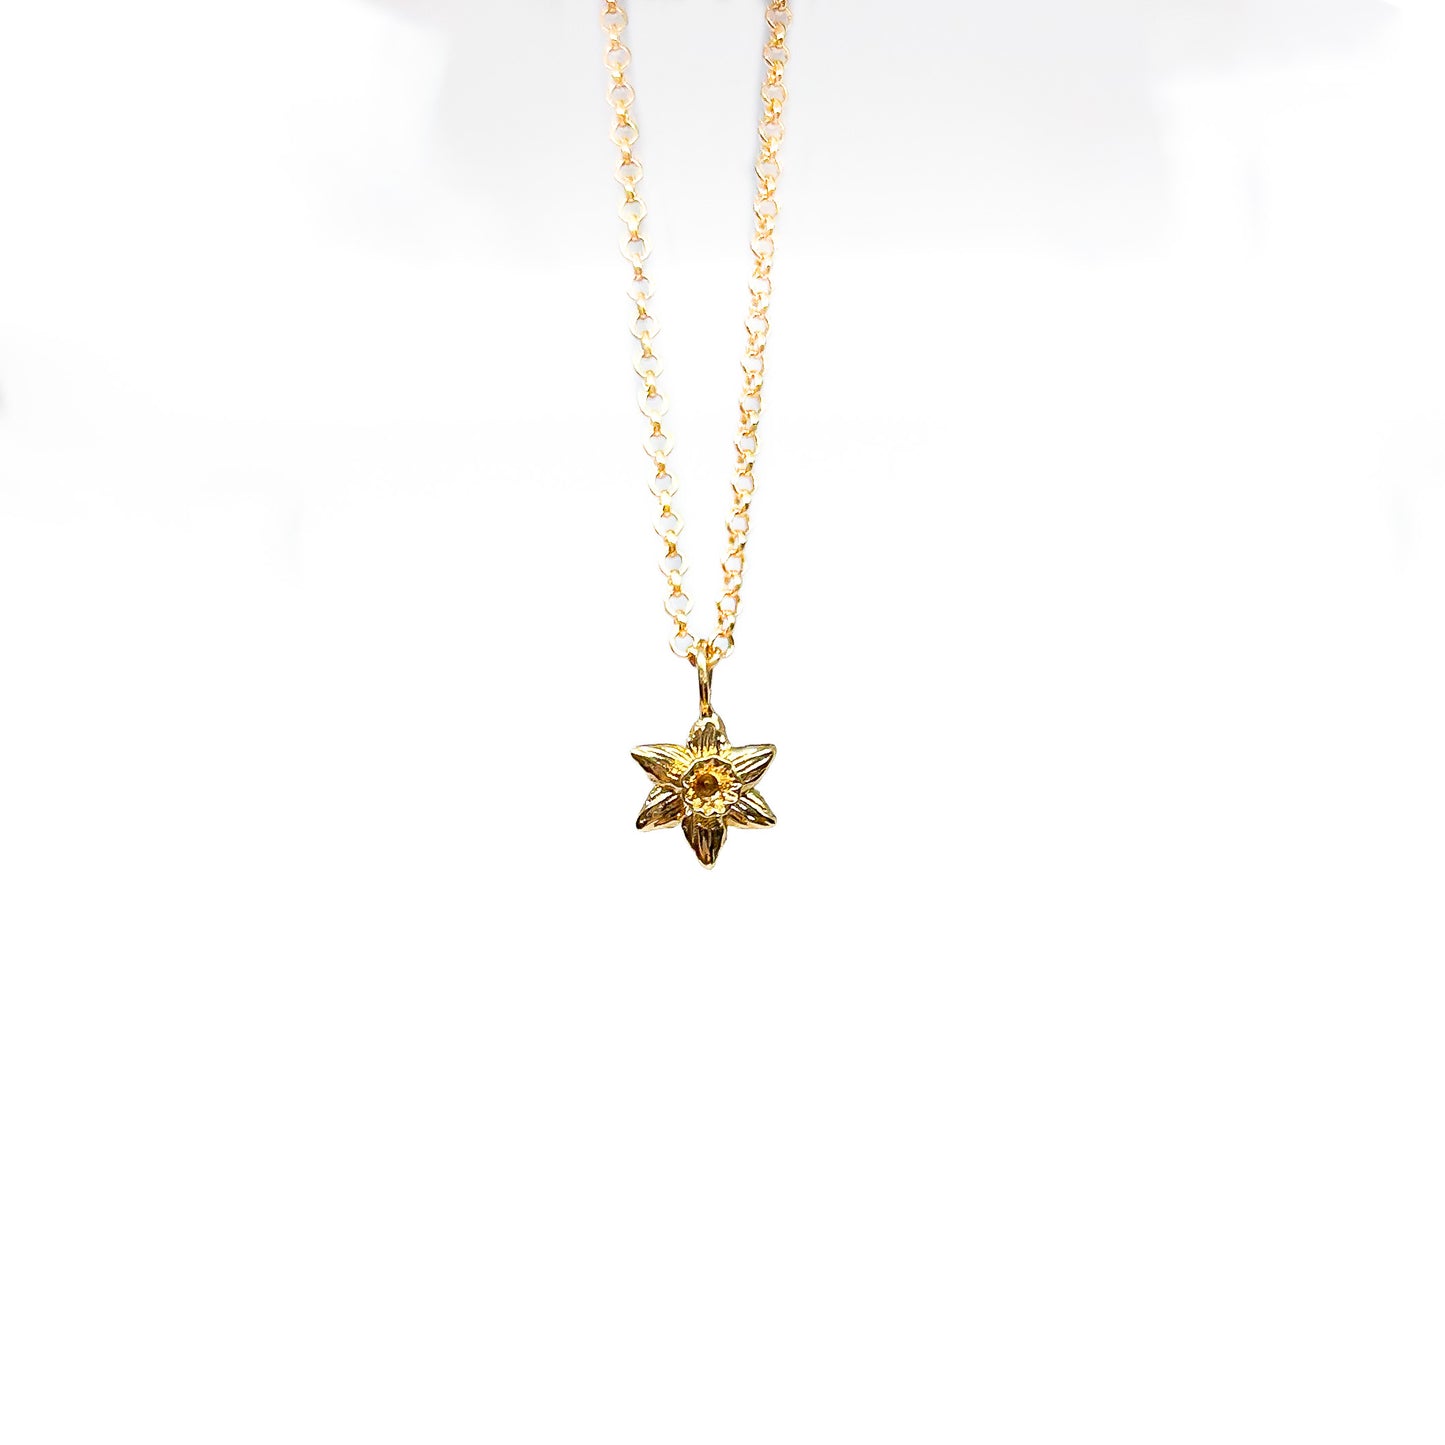 Golden Daffodil Necklace